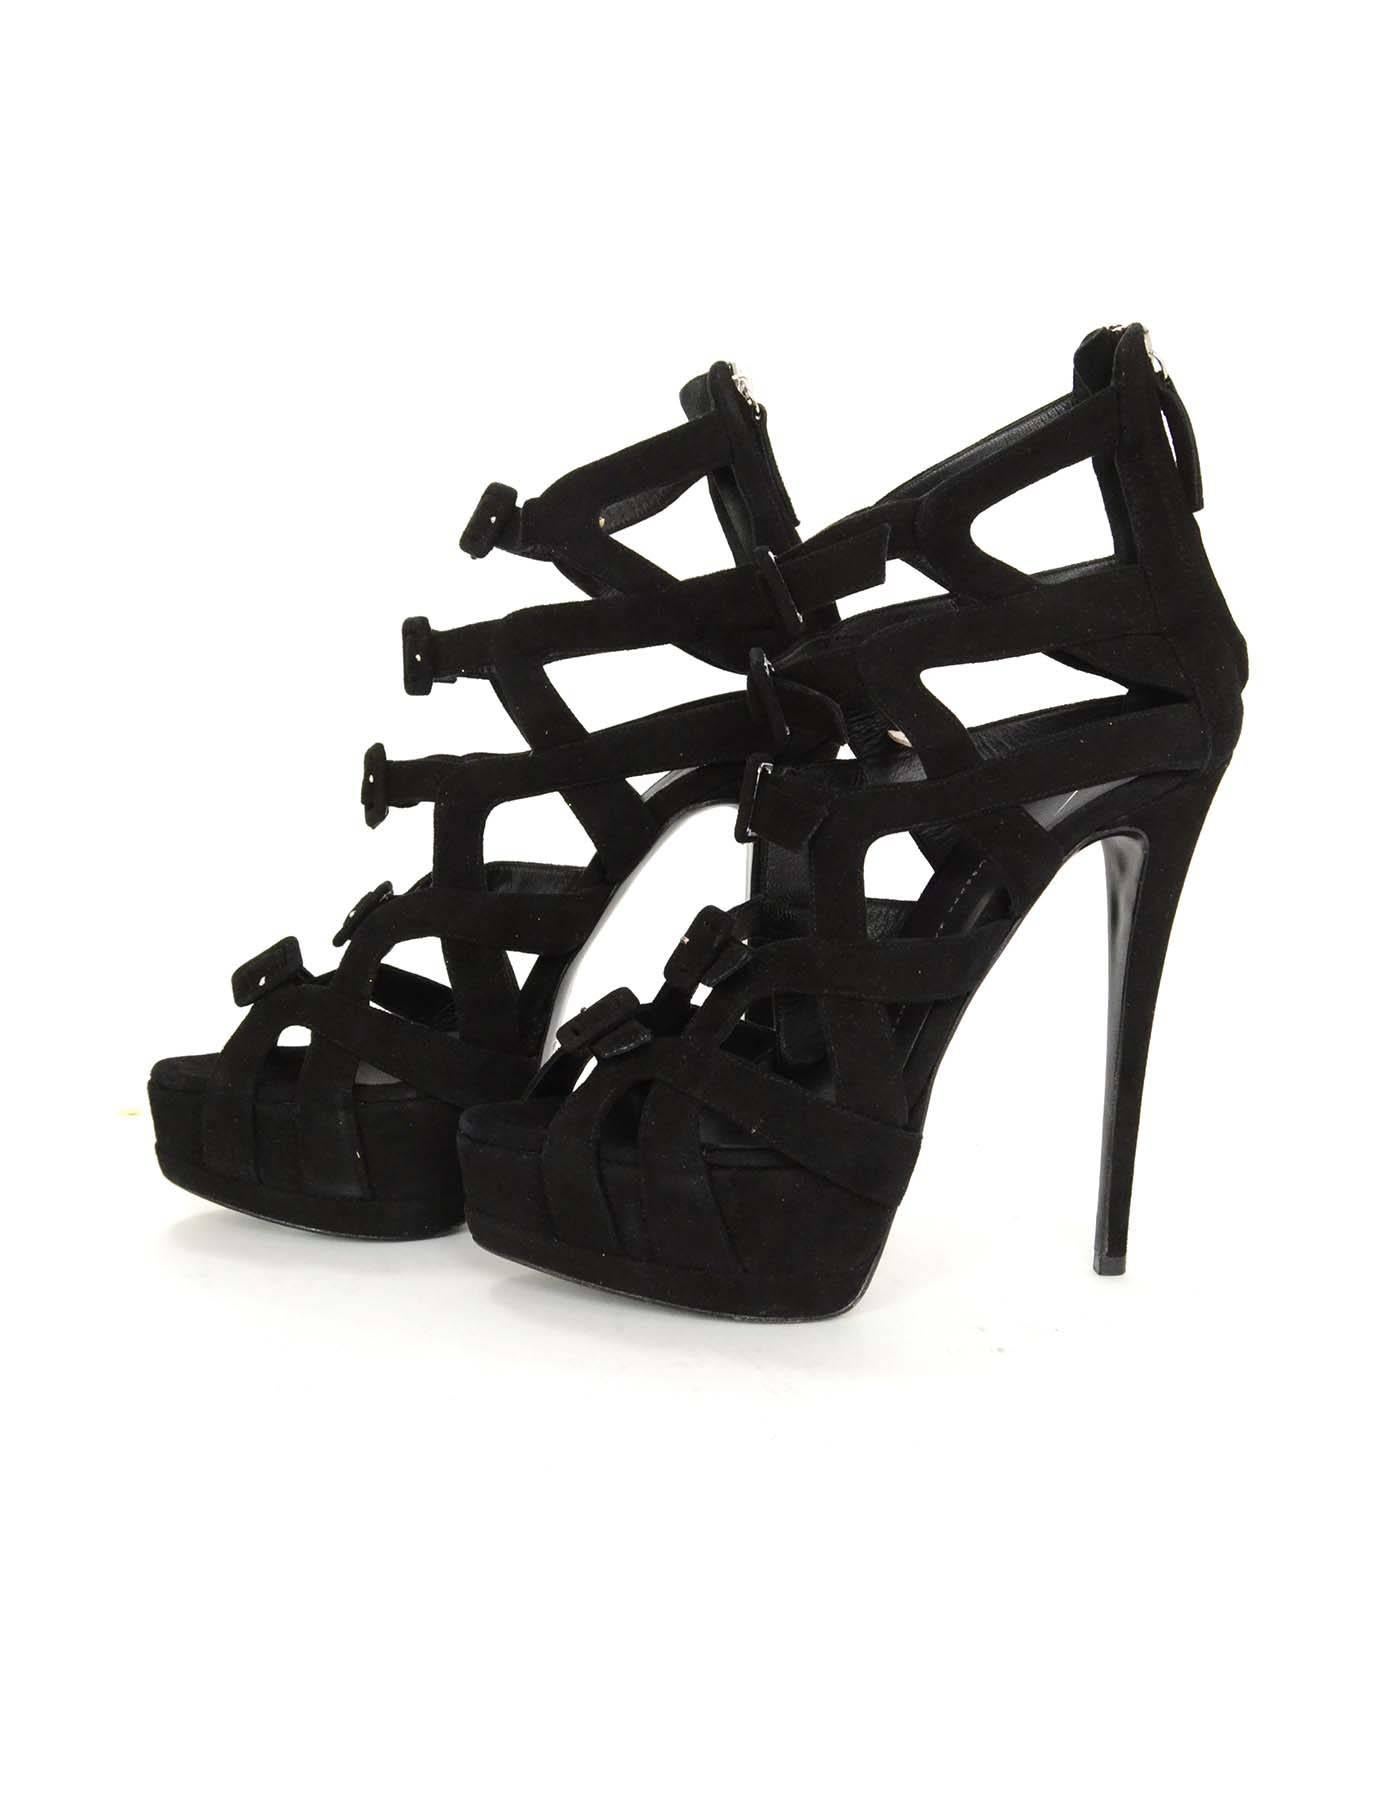 Giuseppe Zanotti Black Suede Strappy Platform Sandals 
Features buckles up front of shoe
Made In: Italy
Color: Black
Materials: Suede
Closure/Opening: Back heel zipper
Sole Stamp: Giuseppe Zanotti Vero Cuoio Made in Italy 40
Overall